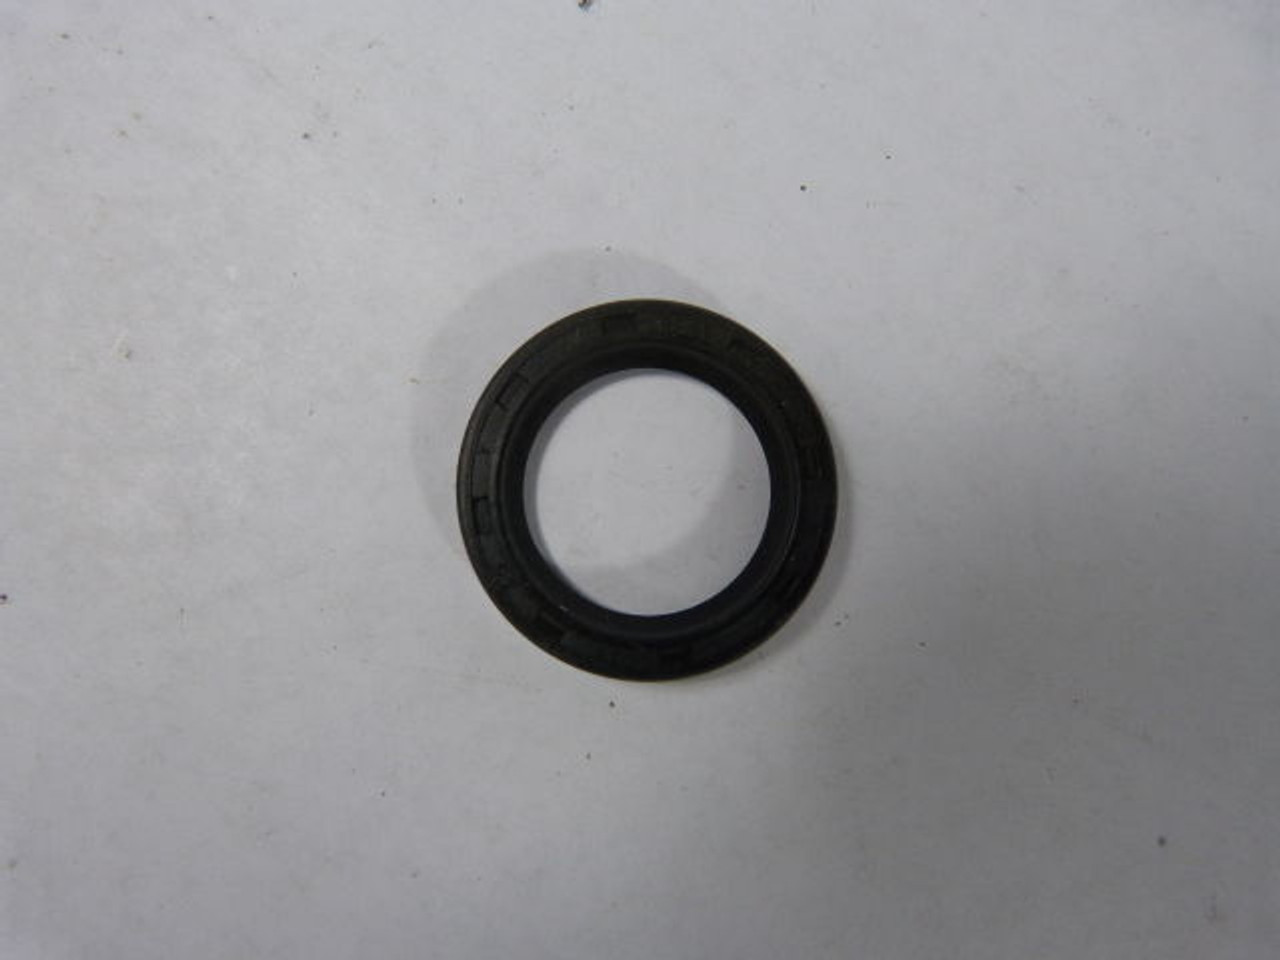 Taurus 0347 Oil Seal 42x30x7 Sold Individually ! NEW !